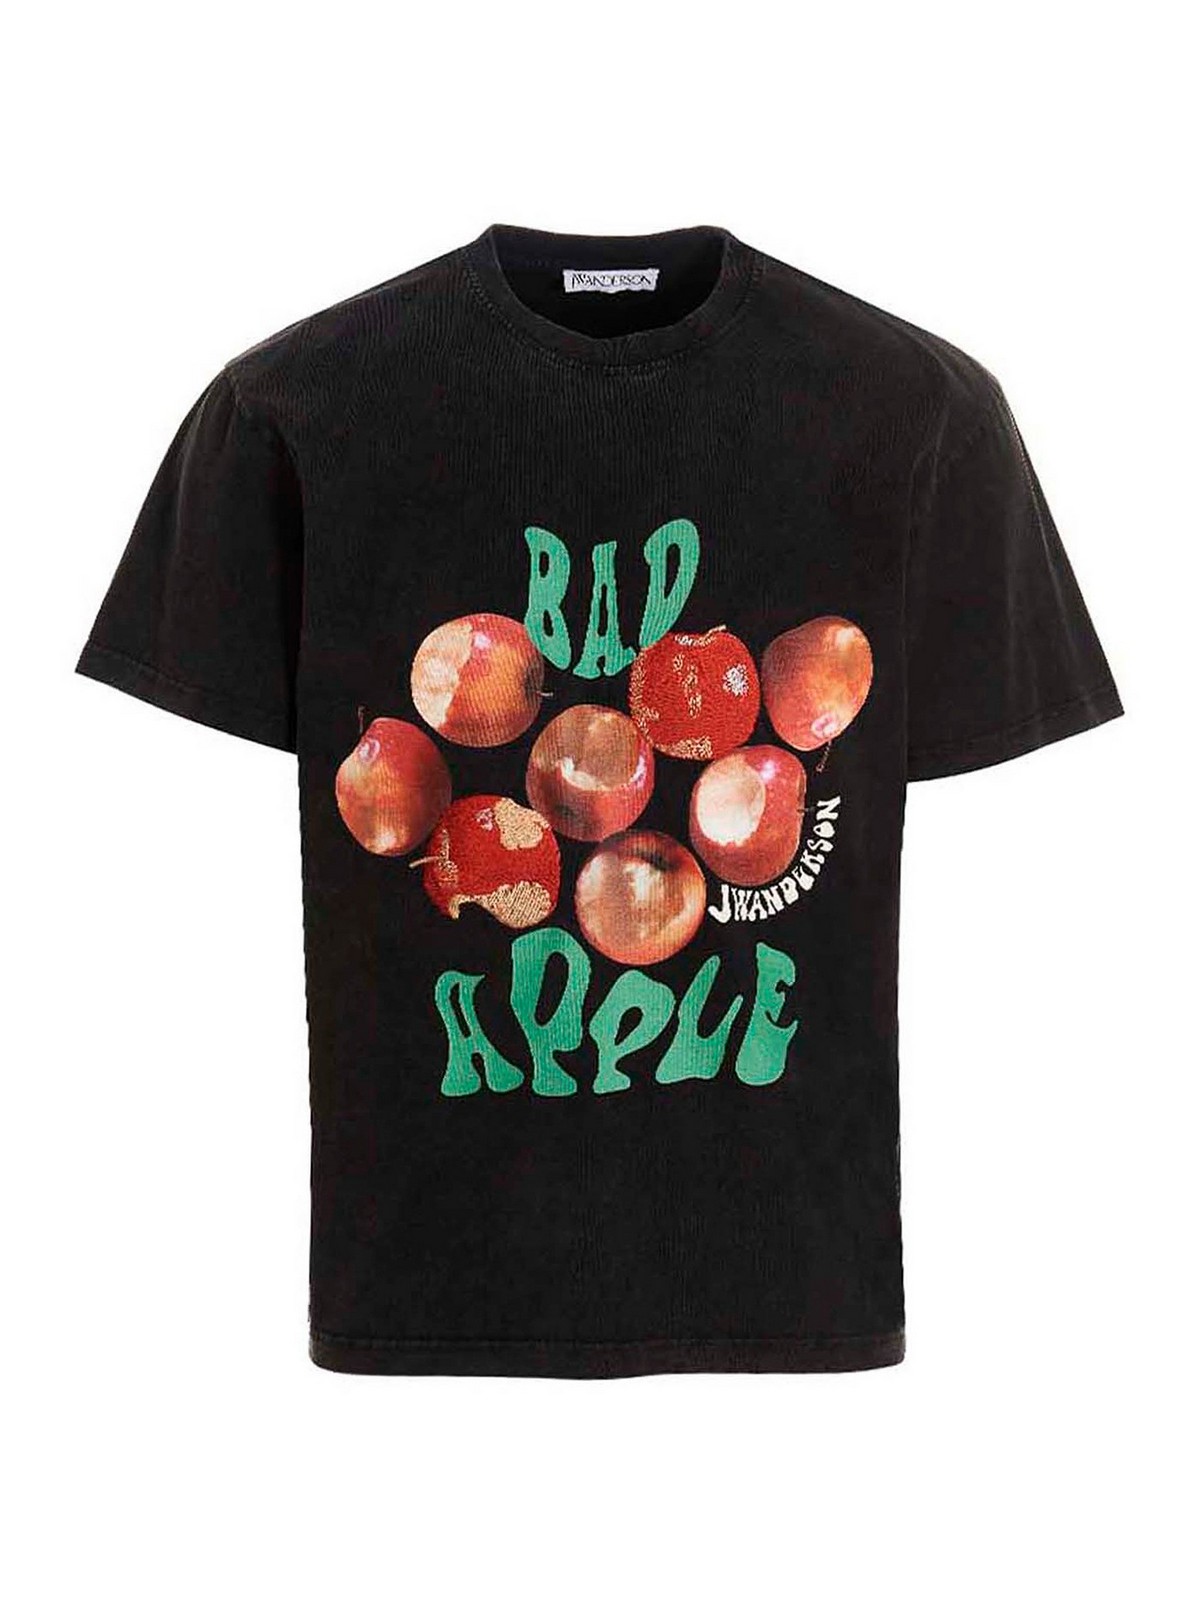 Ewell Kvadrant indstudering T-shirts J.W. Anderson - The apple collection - bad apple T-shirt -  JT0122PG1236599